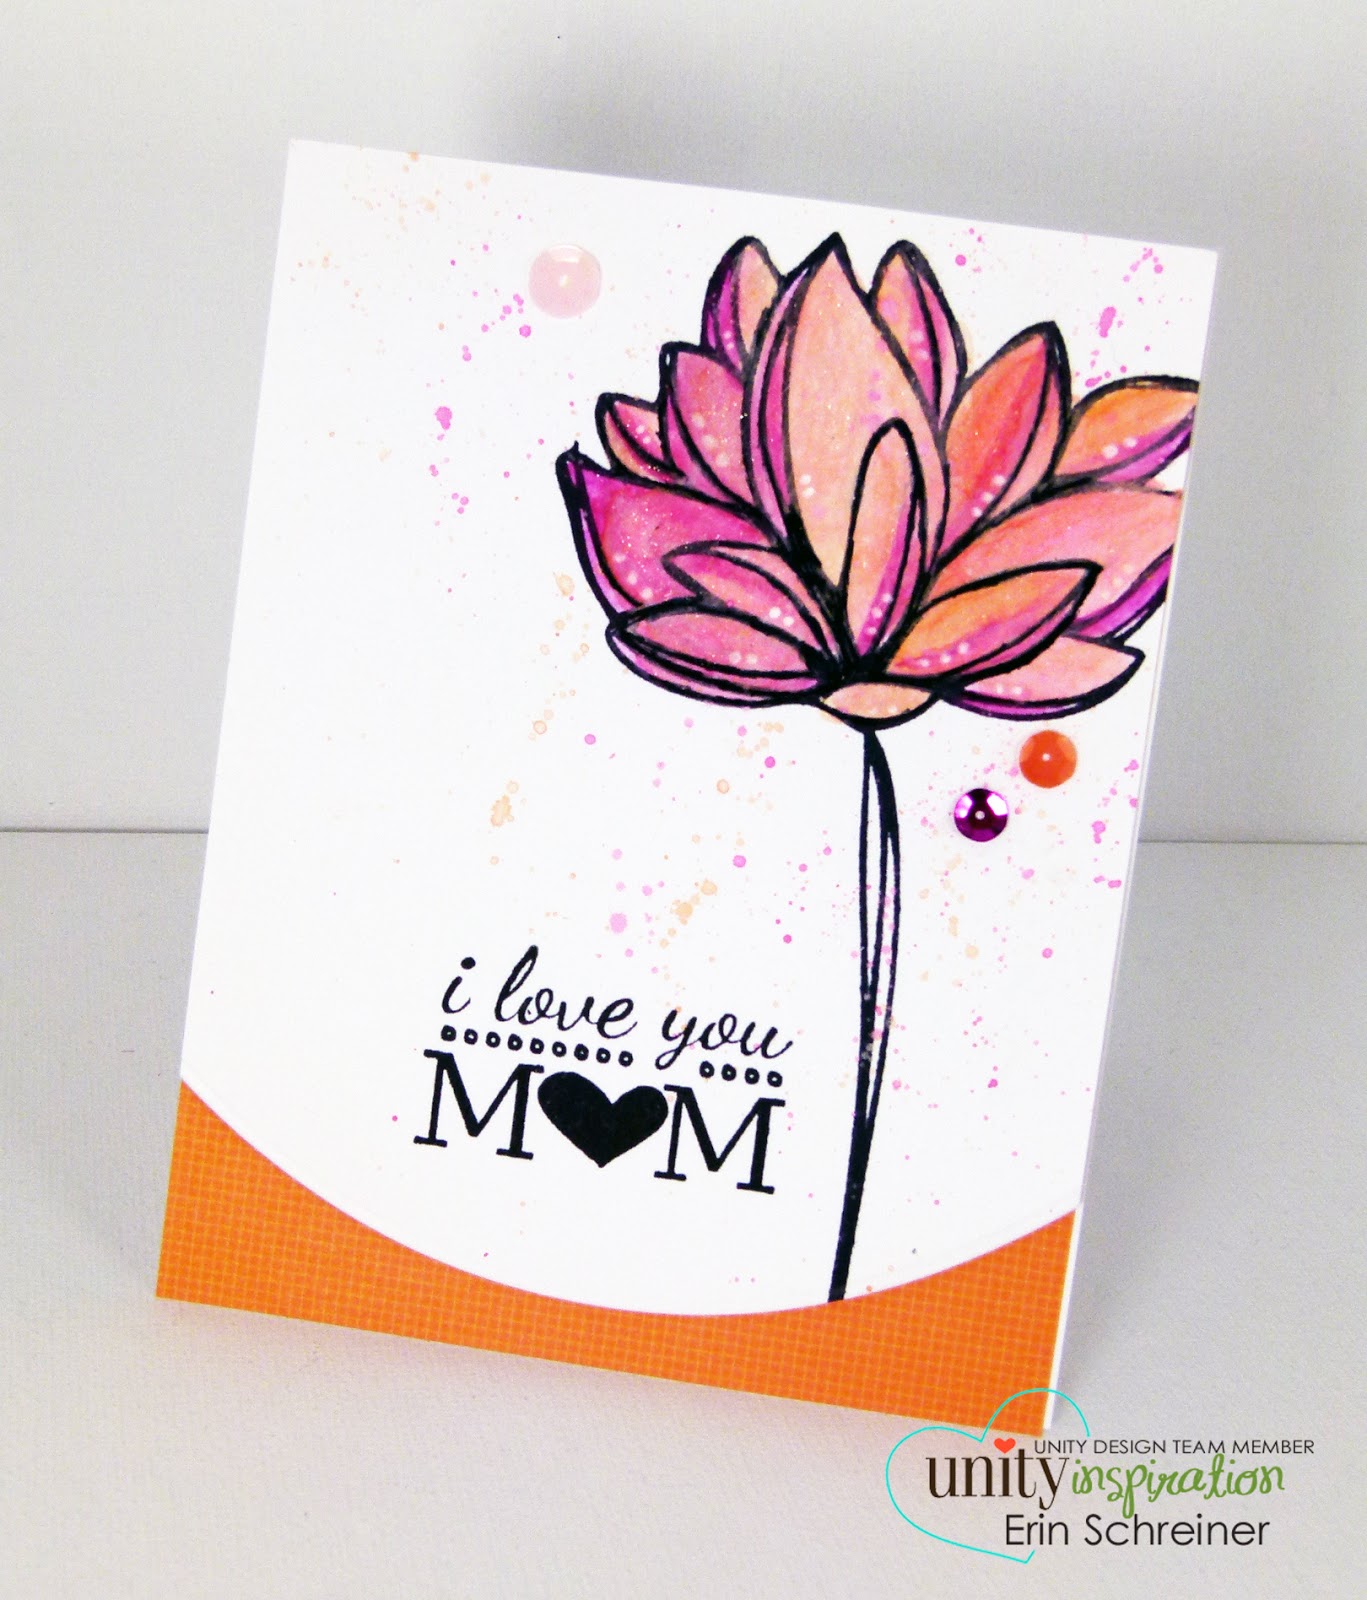 KOTM Monday: Mother’s Day is Coming!